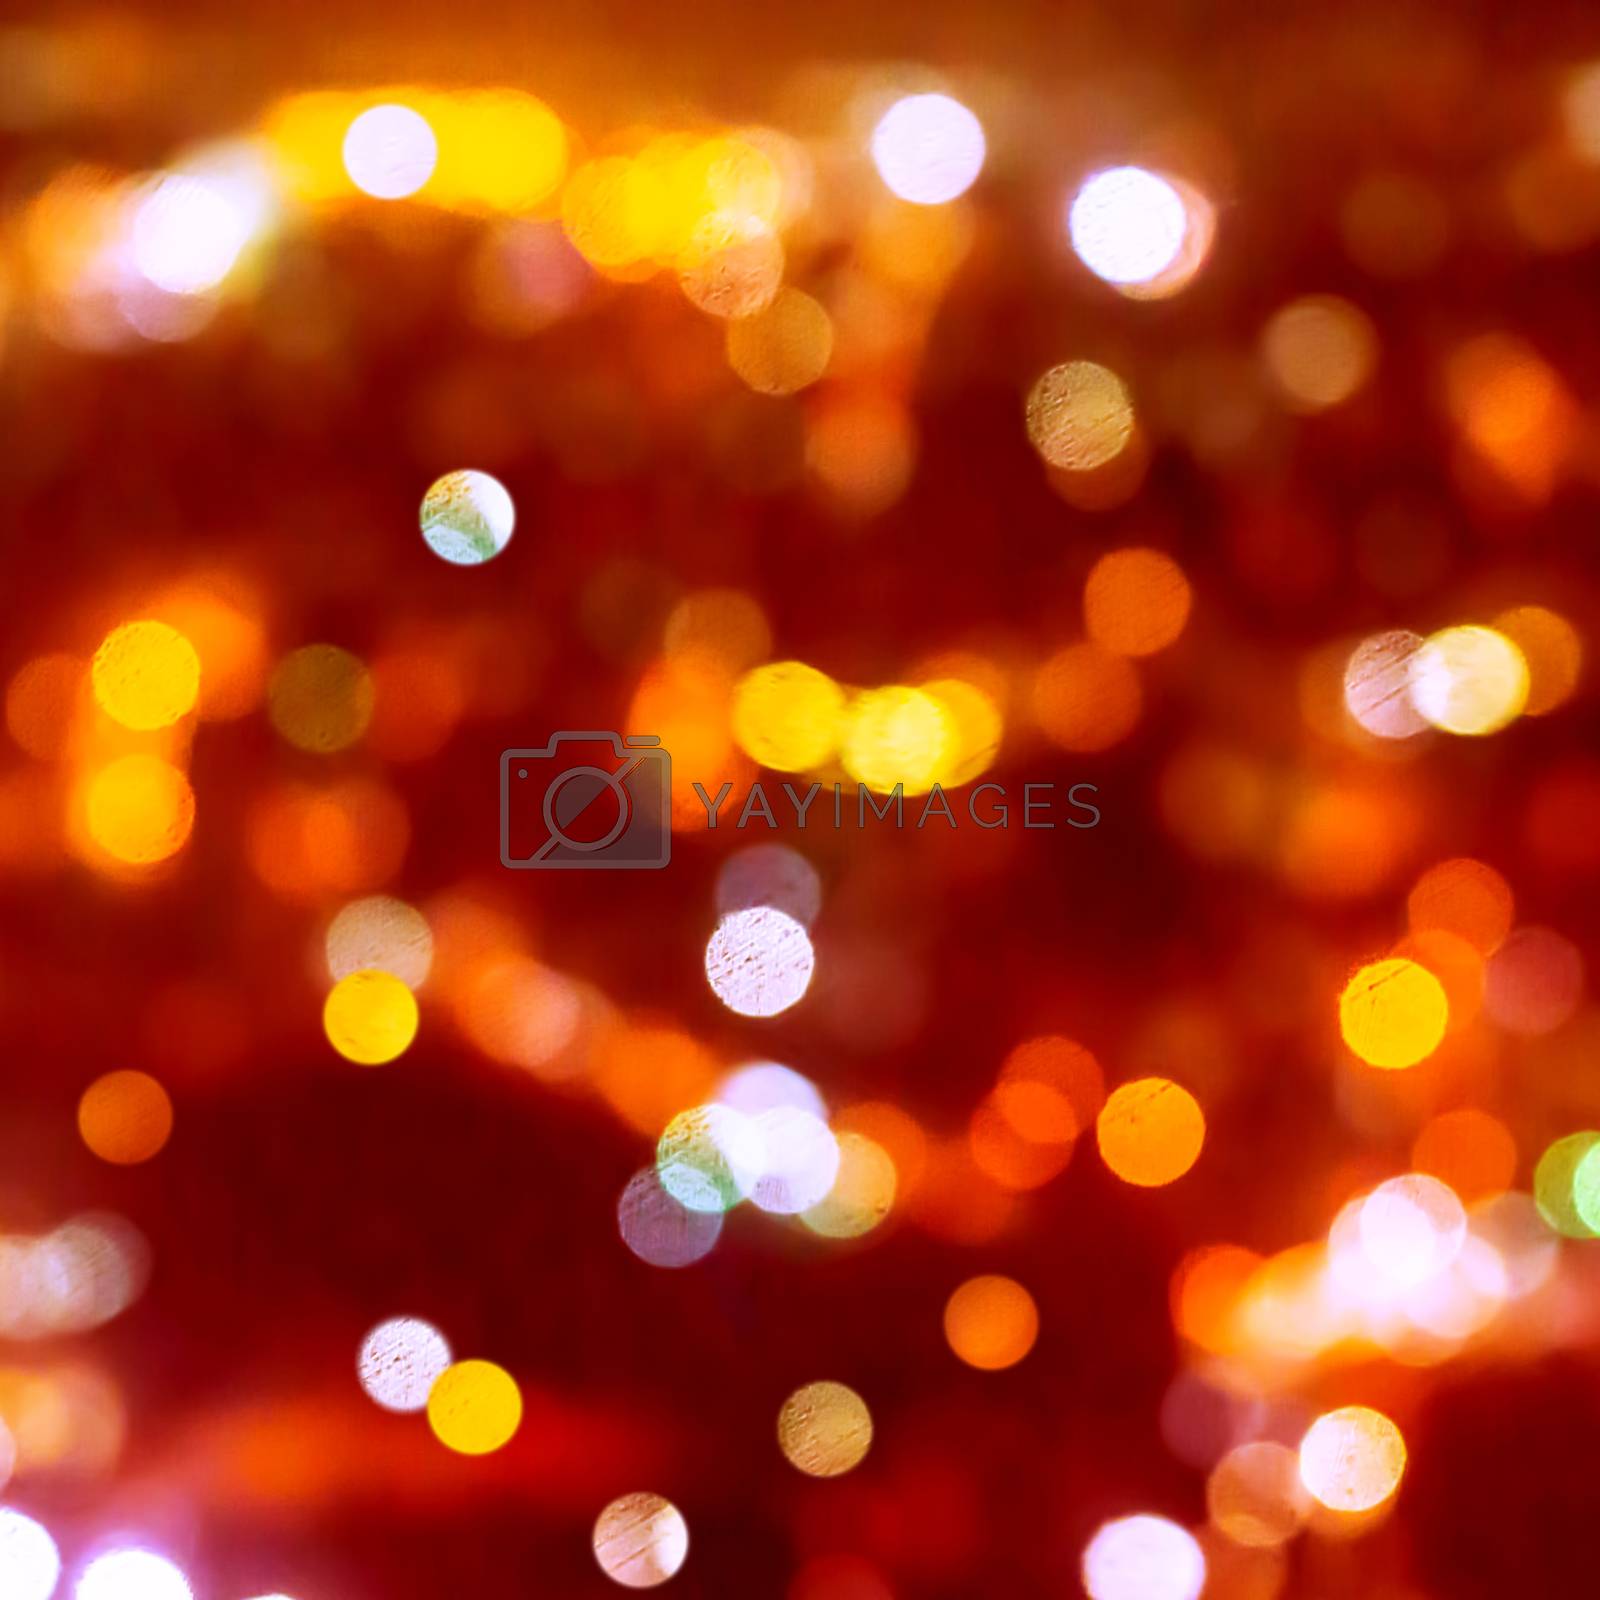 Royalty free image of Christmas background of blur bokeh lights by Anna_Omelchenko